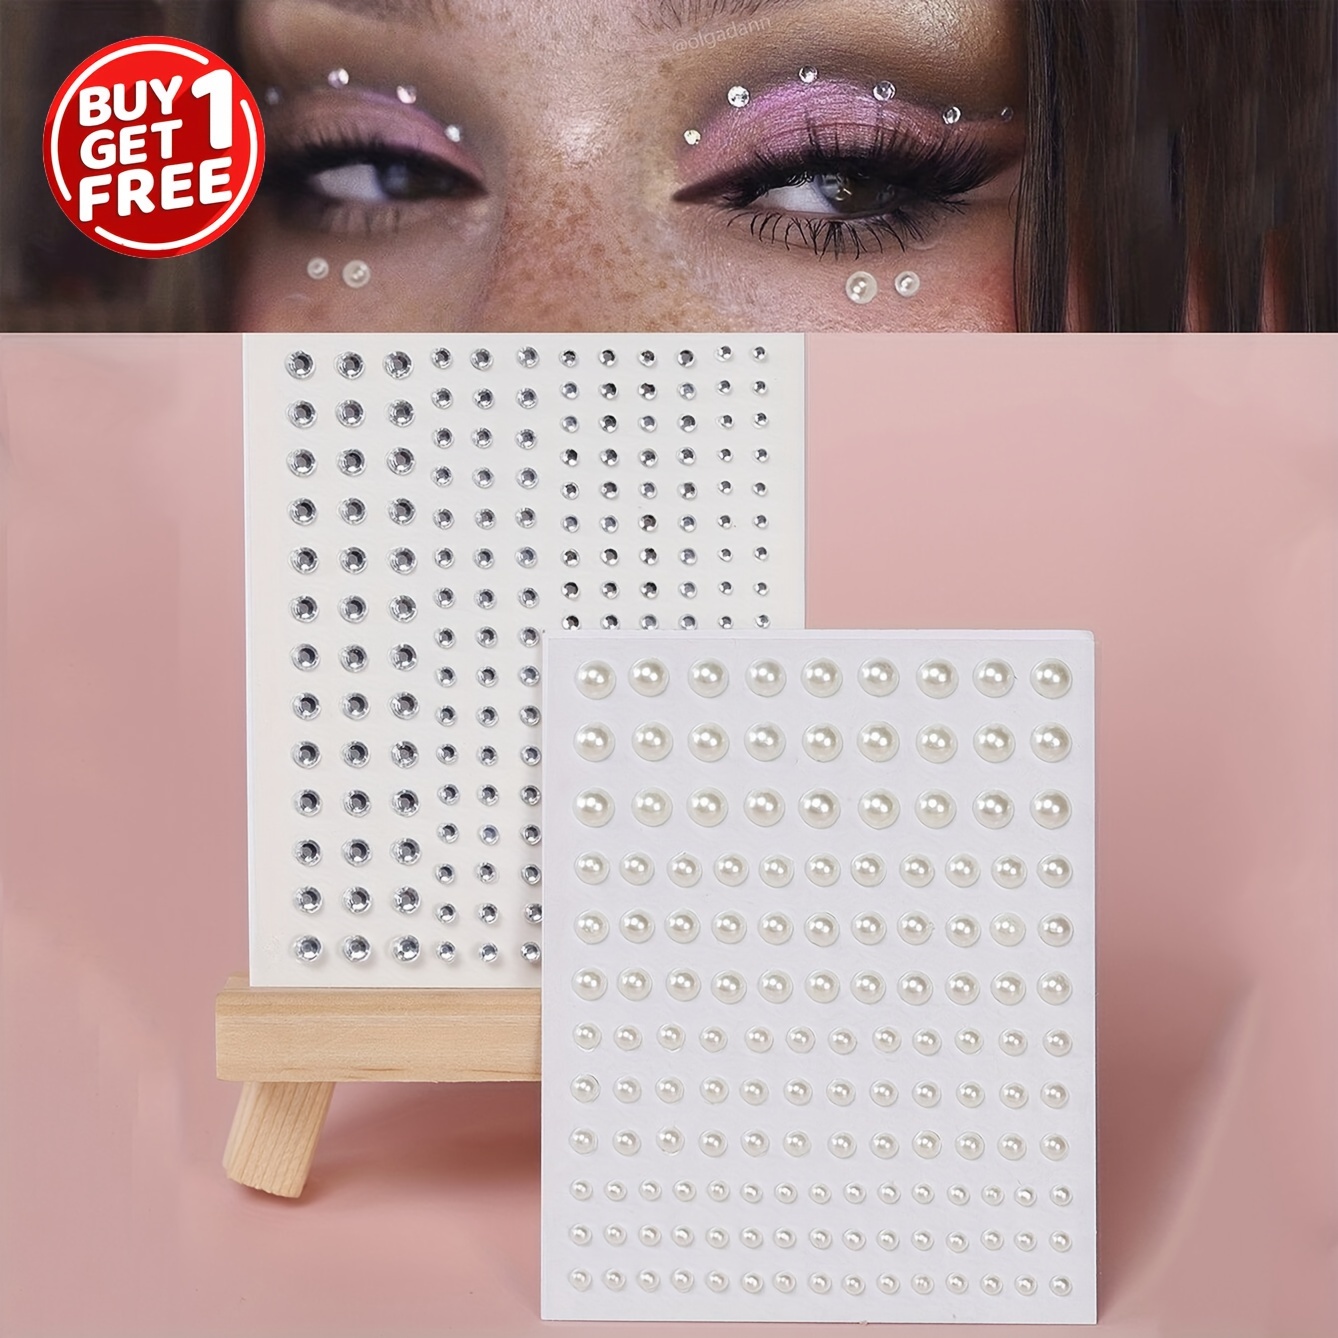 4 PCS/Set Self-Adhesive Face Rhinestones For Makeup Festival Face Jewelry,  Stick On Pearls Hair Gems, Pearl Rhinestones Stickers For Face, Hair, Eye